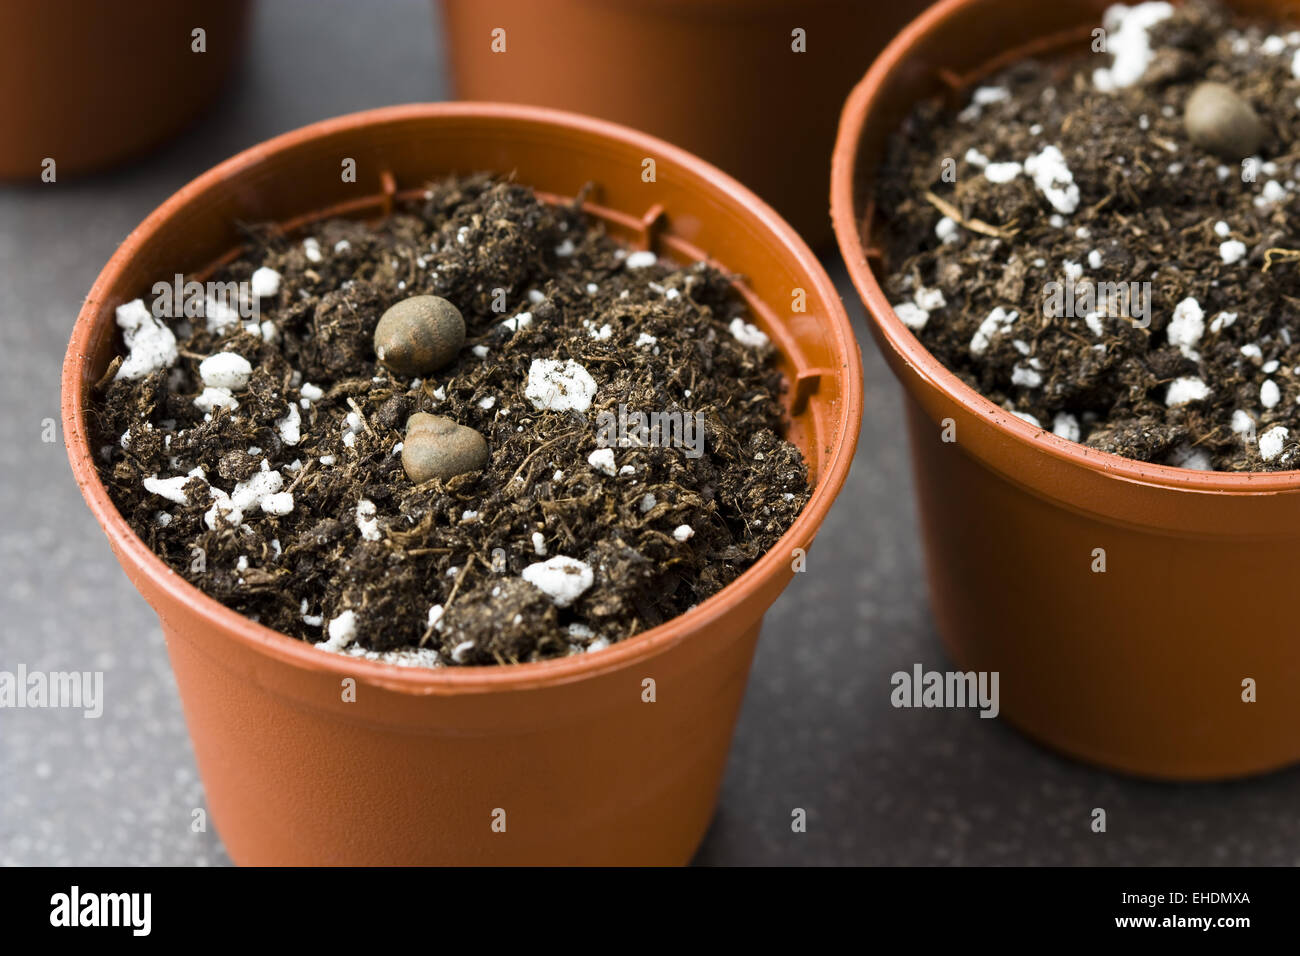 Anzucht Blumenerde High Resolution Stock Photography and Images - Alamy